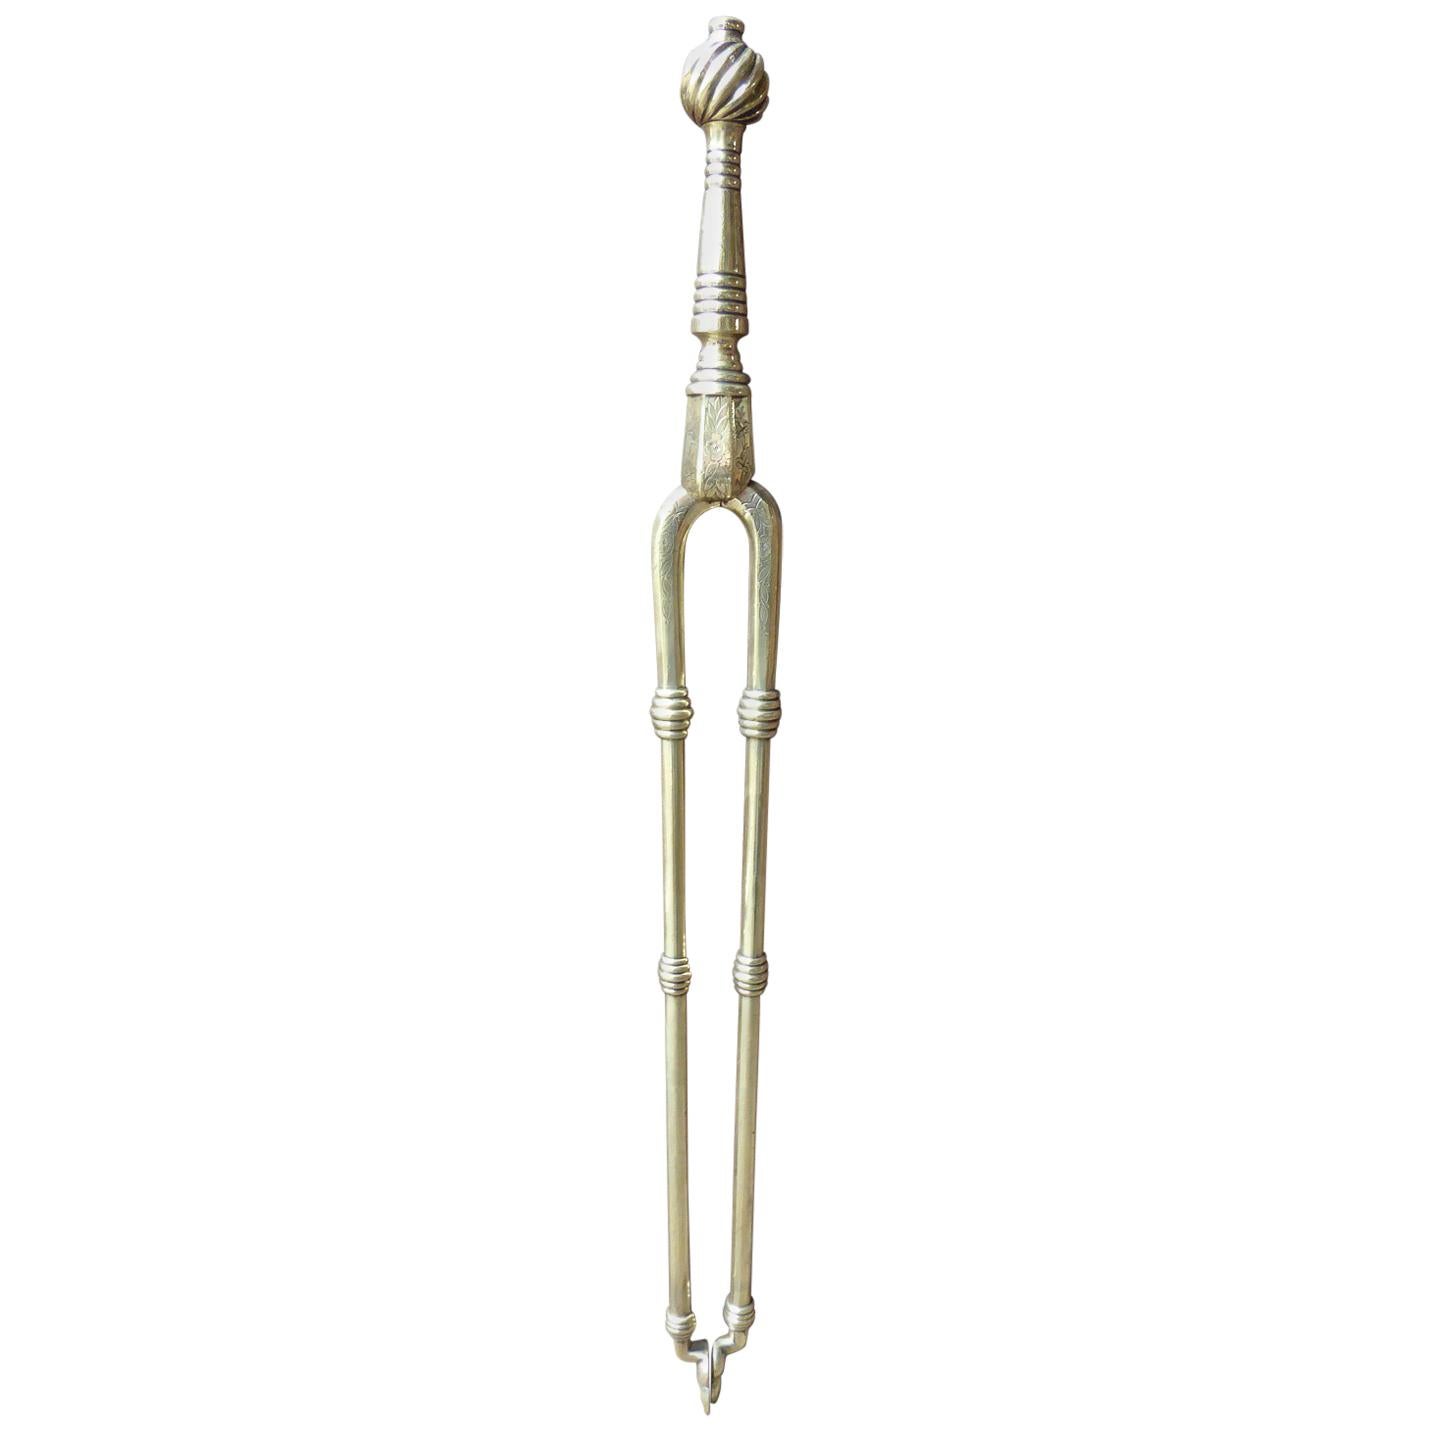 English Victorian Fireplace Tongs or Fire Tongs